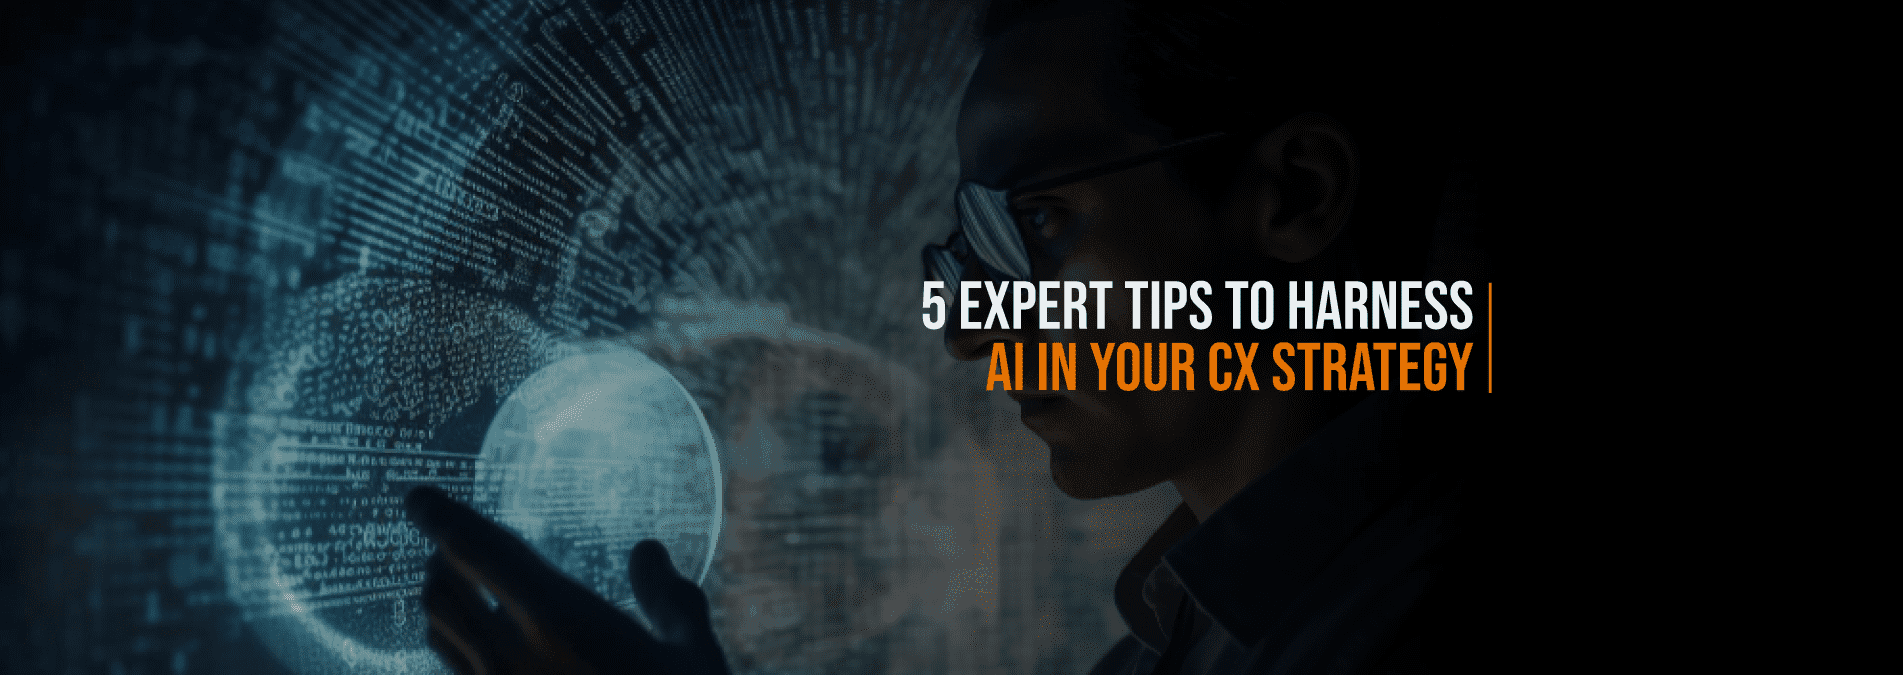 5-Expert-Tips-to-Harness-AI-in-Your-CX-Strategy - Internet Soft